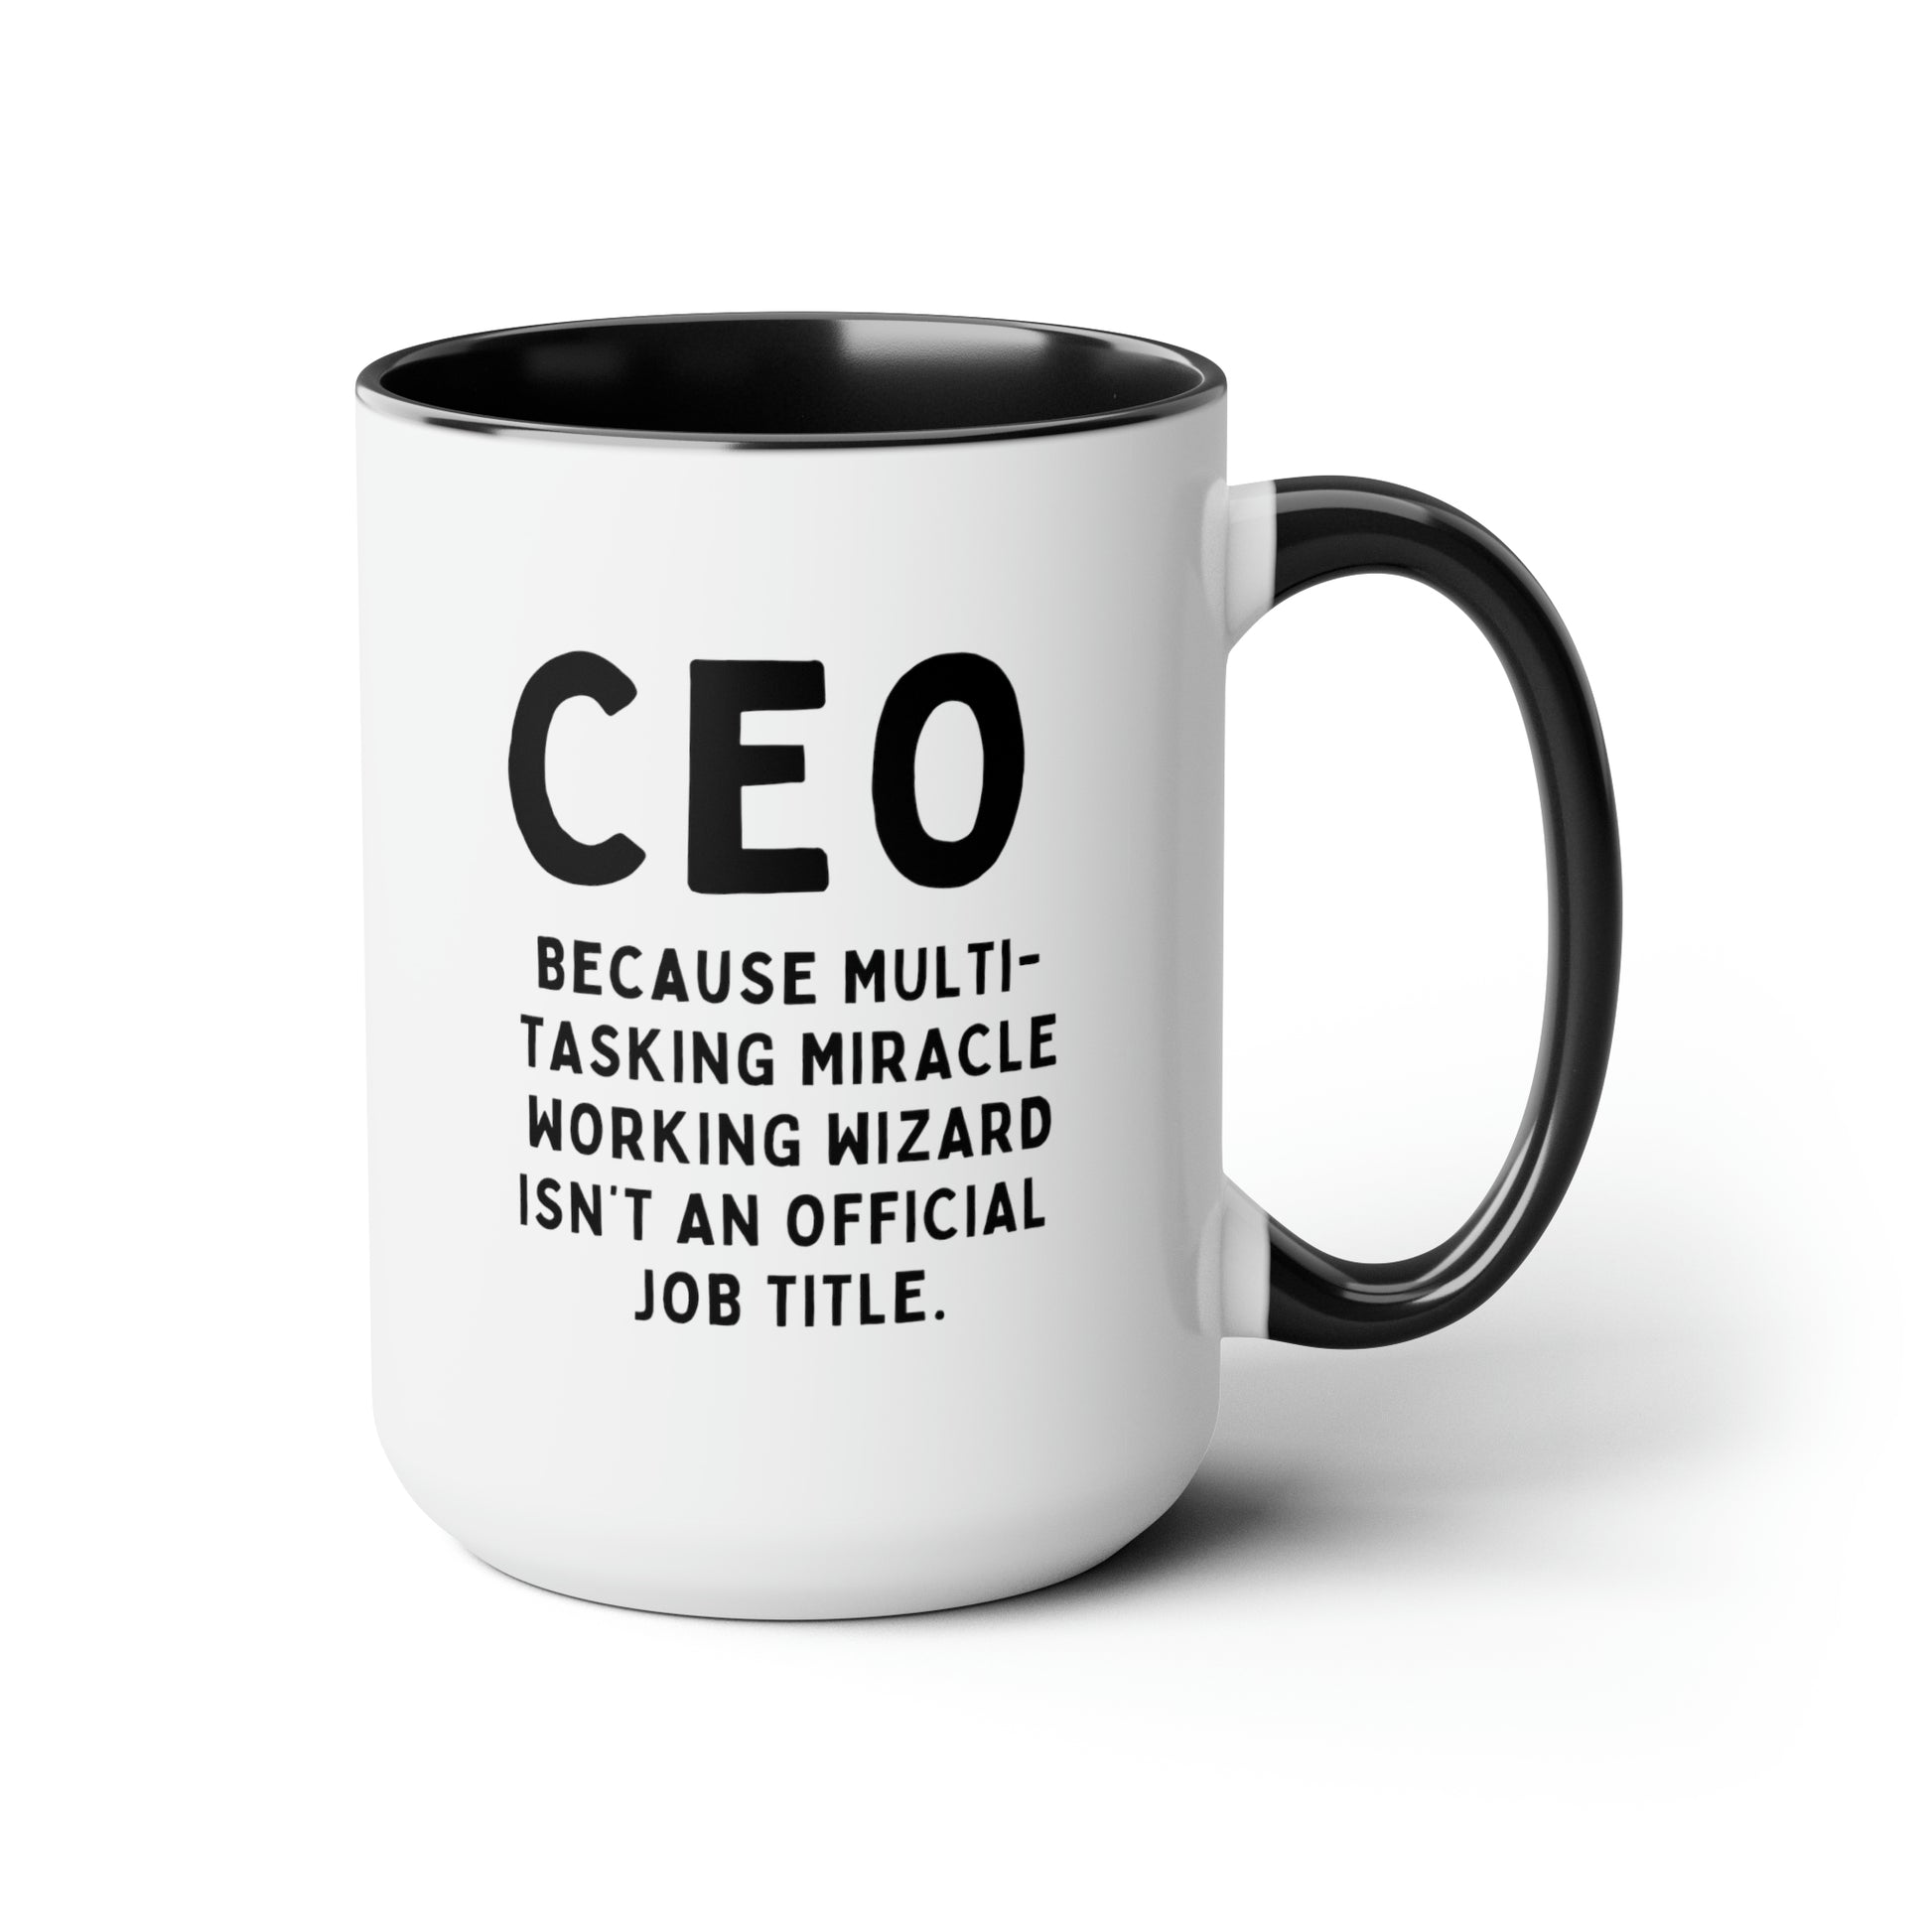 CEO Because Multi-tasking Miracle Working Wizard Isnt An Official Job Title 15oz white with black accent funny large coffee mug gift for boss job work office waveywares wavey wares wavywares wavy wares